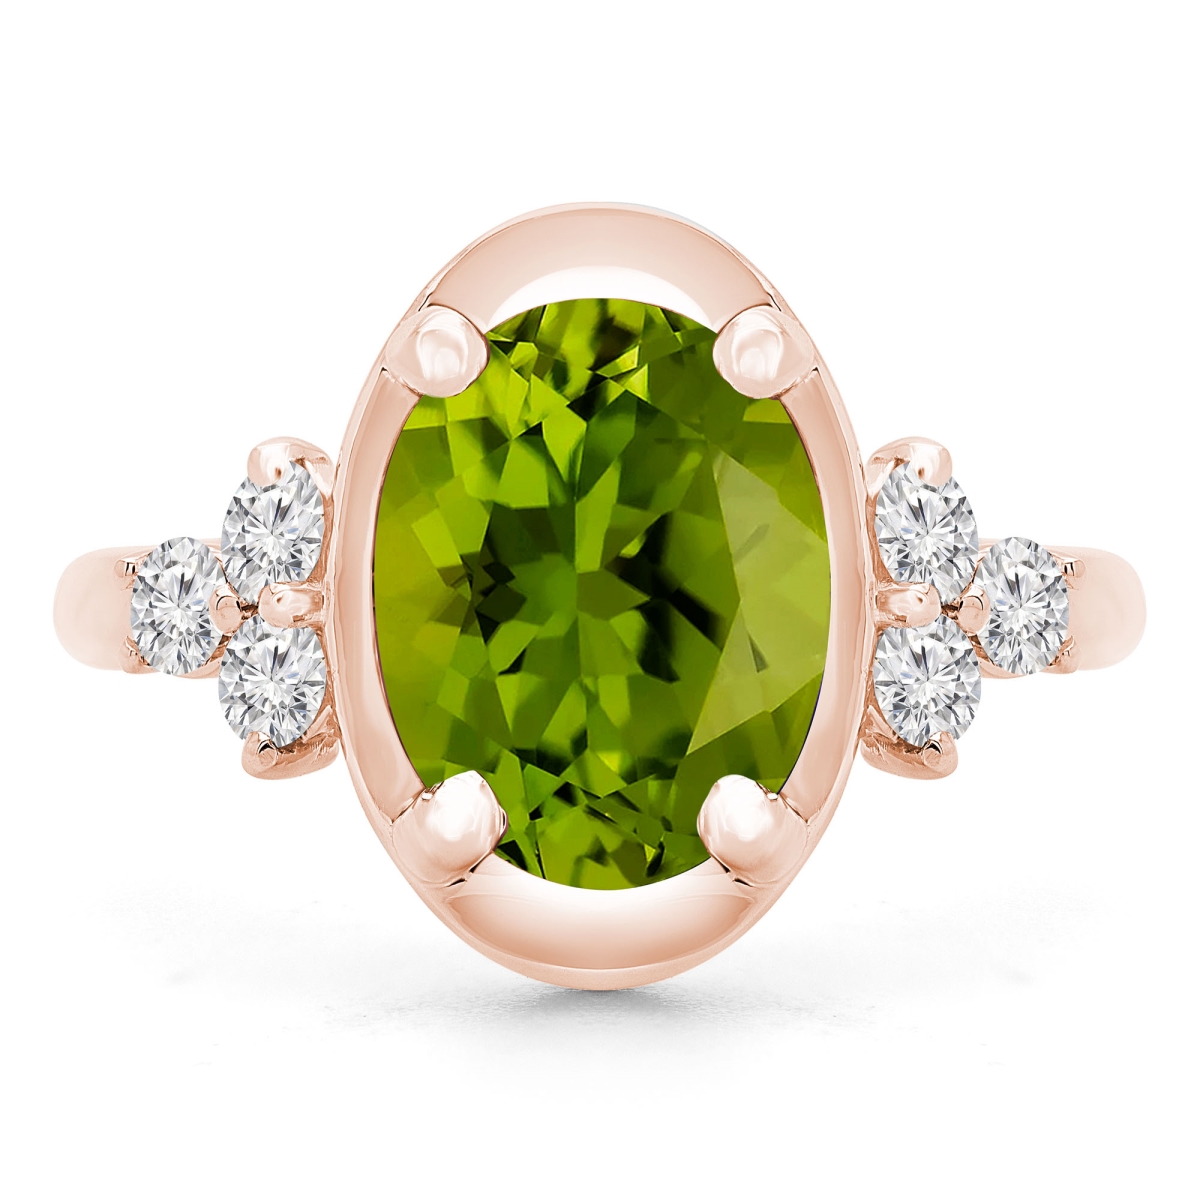 Picture of Majesty Diamonds MD190412-7.75 3.9 CTW Oval Green Peridot Cocktail Ring in 14K Rose Gold - Size 7.75